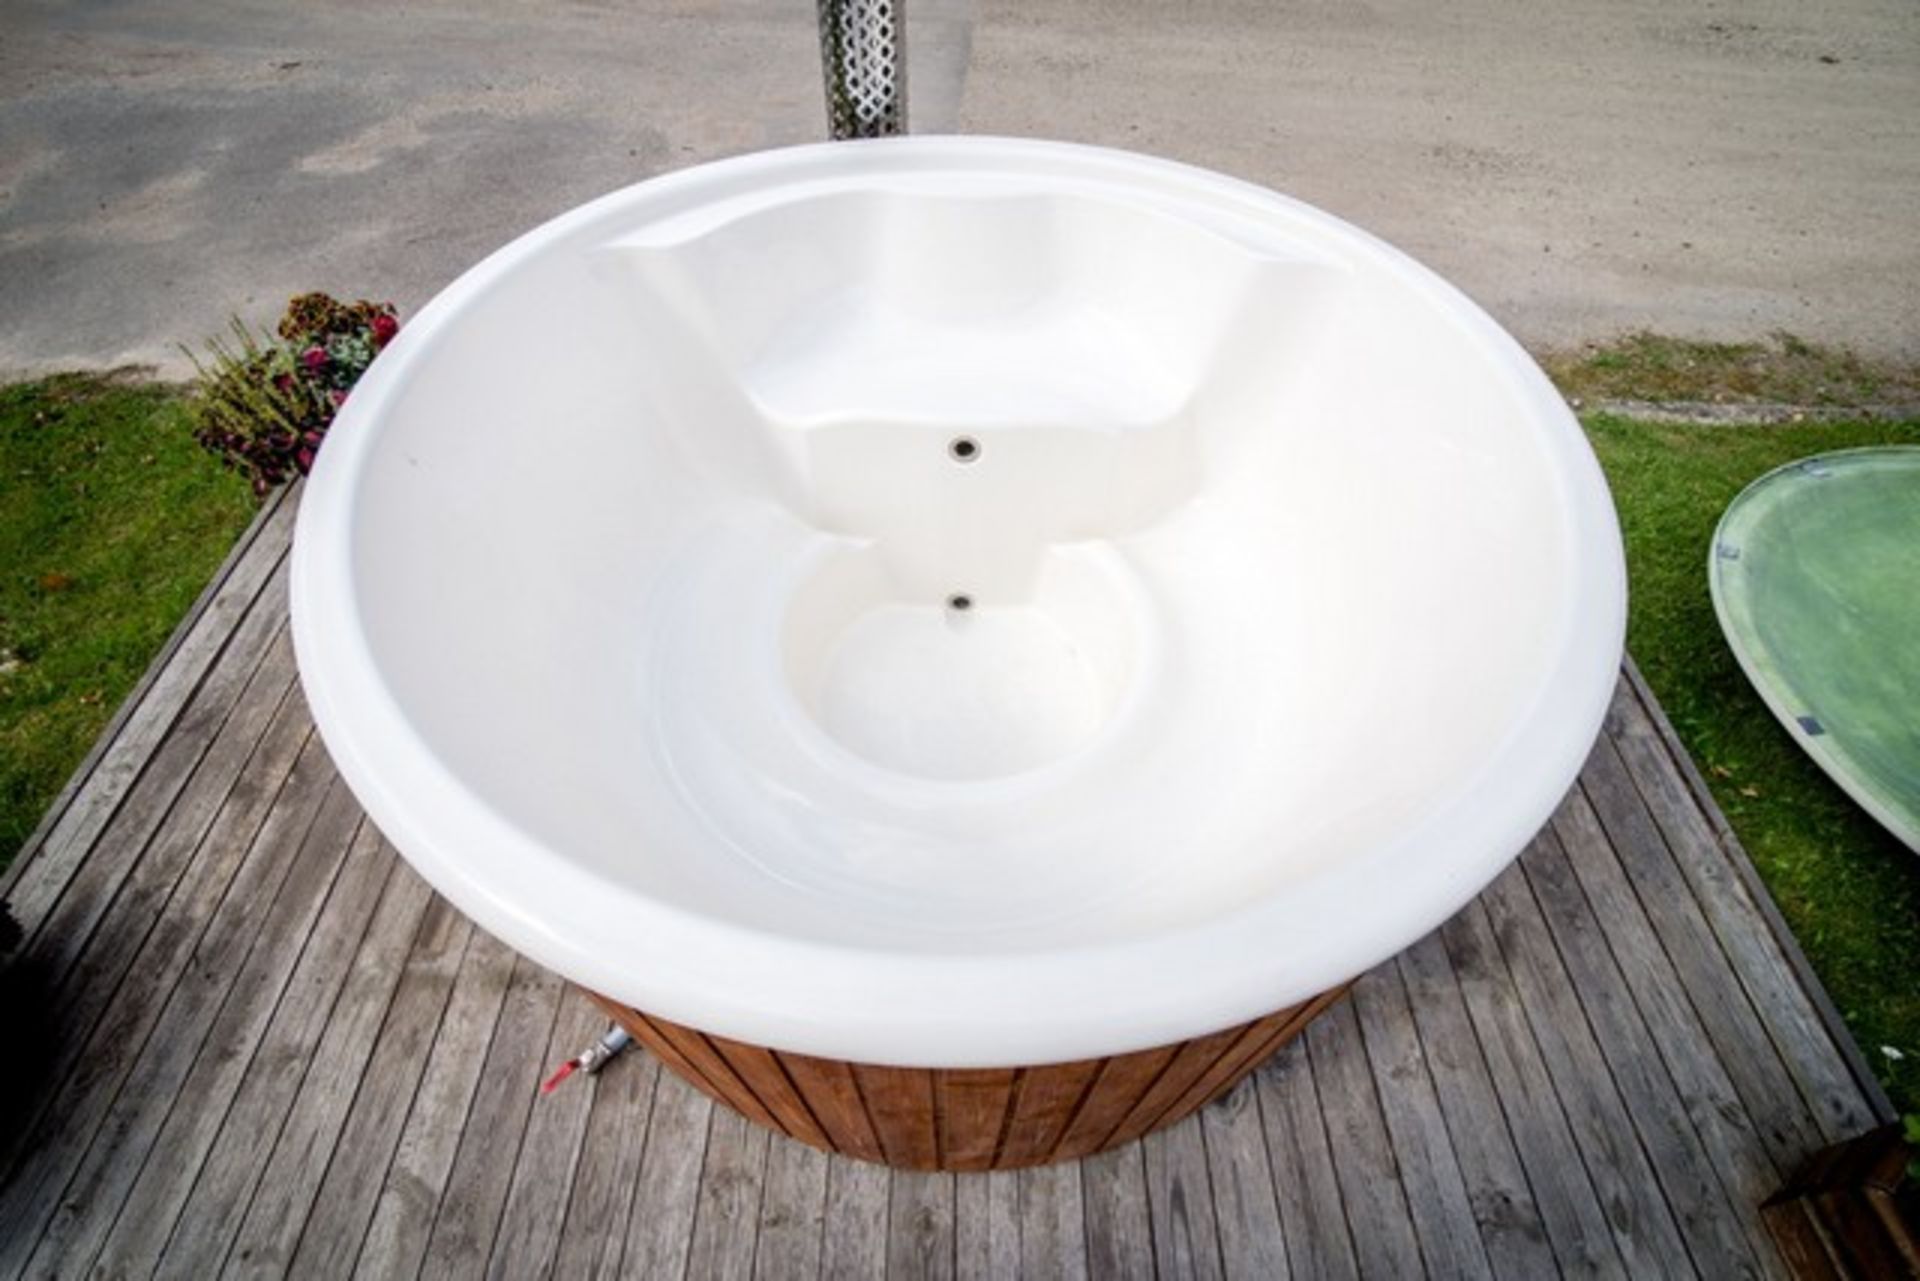 + VAT Brand New 1.8m Fiberglass Hot Tub with Stainless Steel Heater and Chimney - Hot Tub Made from - Image 3 of 3